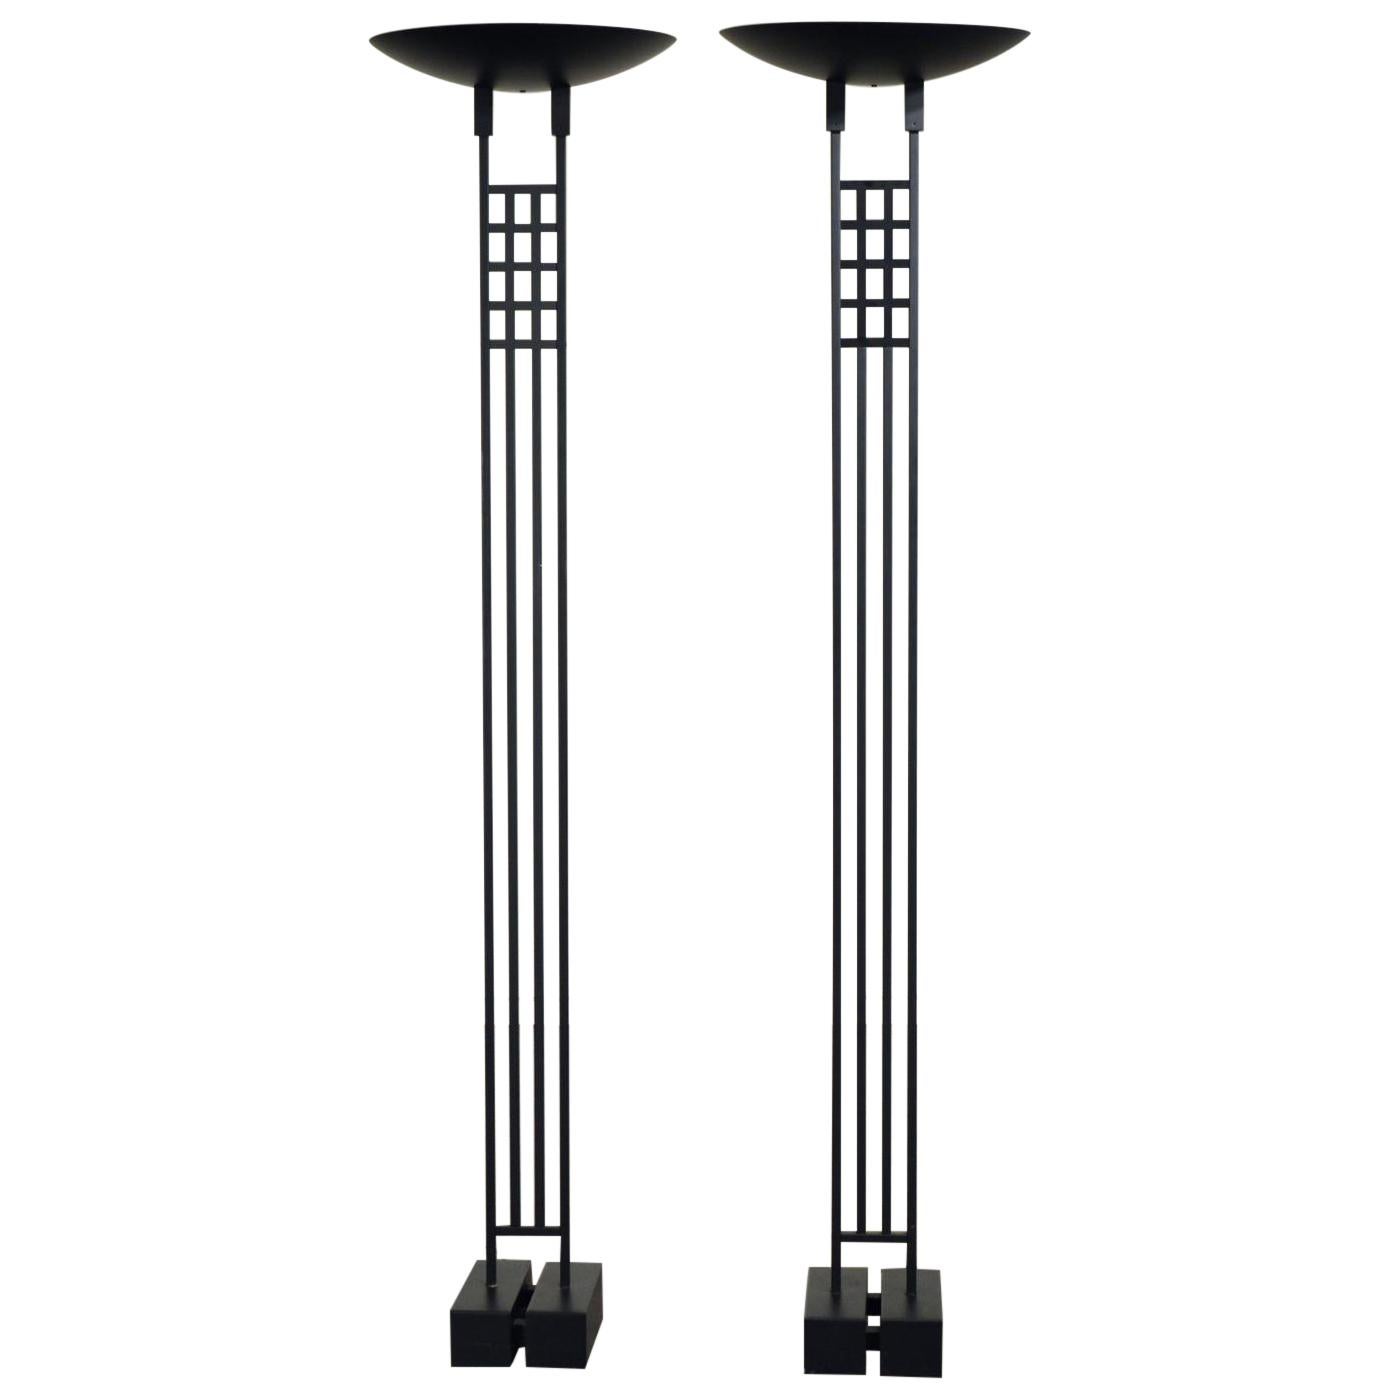 Pair Black Post-Modern Torchiere Lamps by Robert Sonneman for Kovacs, 1980's For Sale